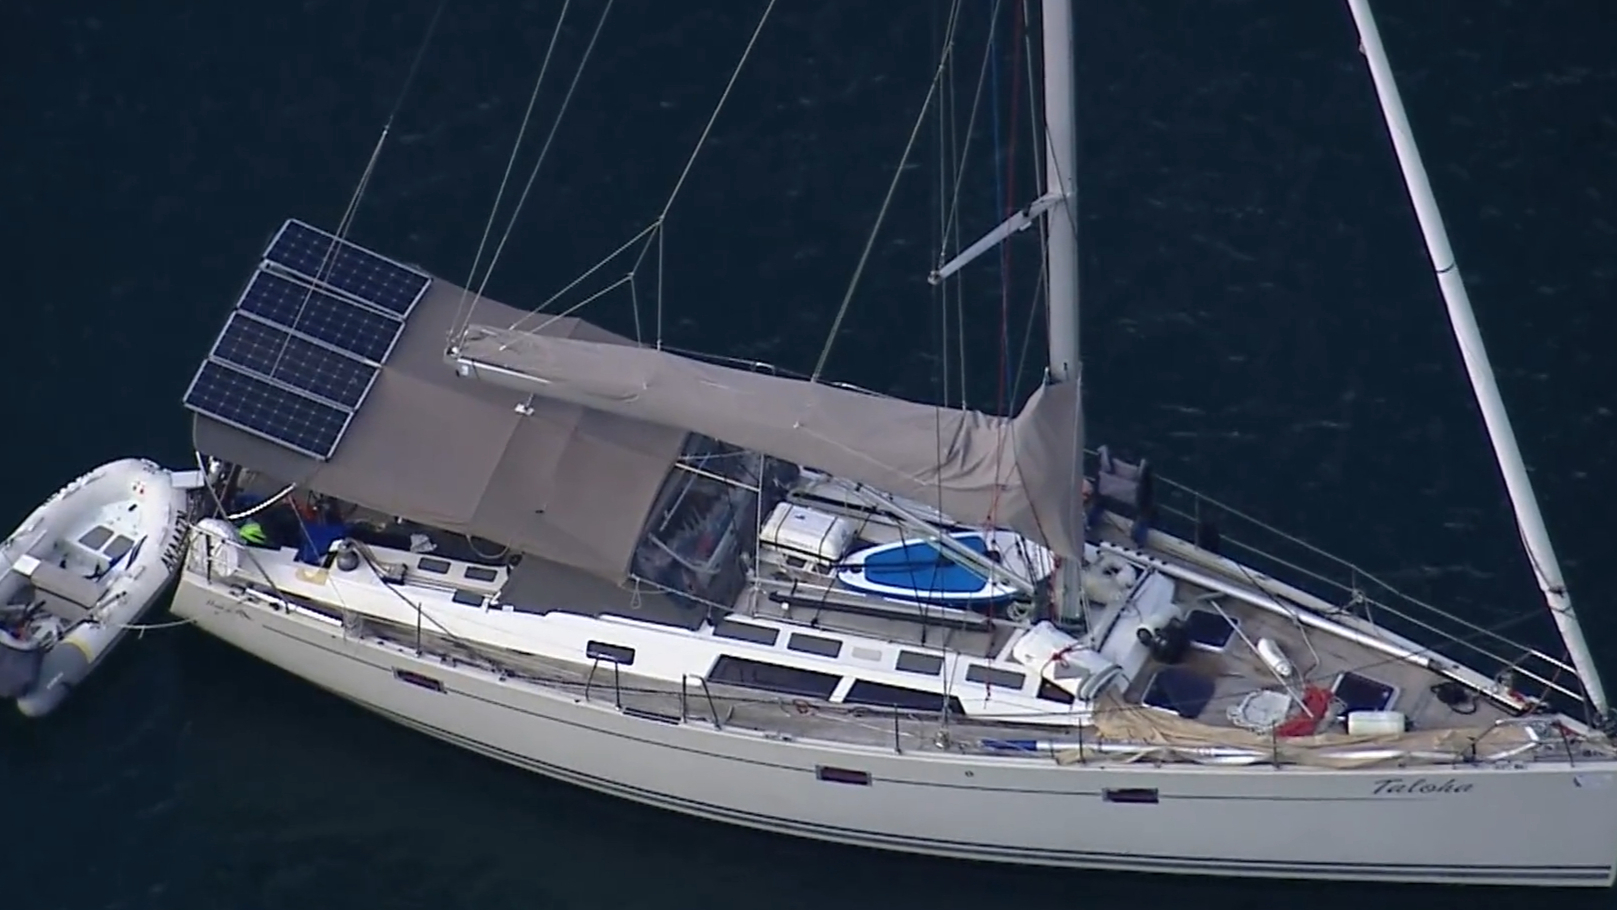 Police investigating after two people found dead on yacht in Sydney